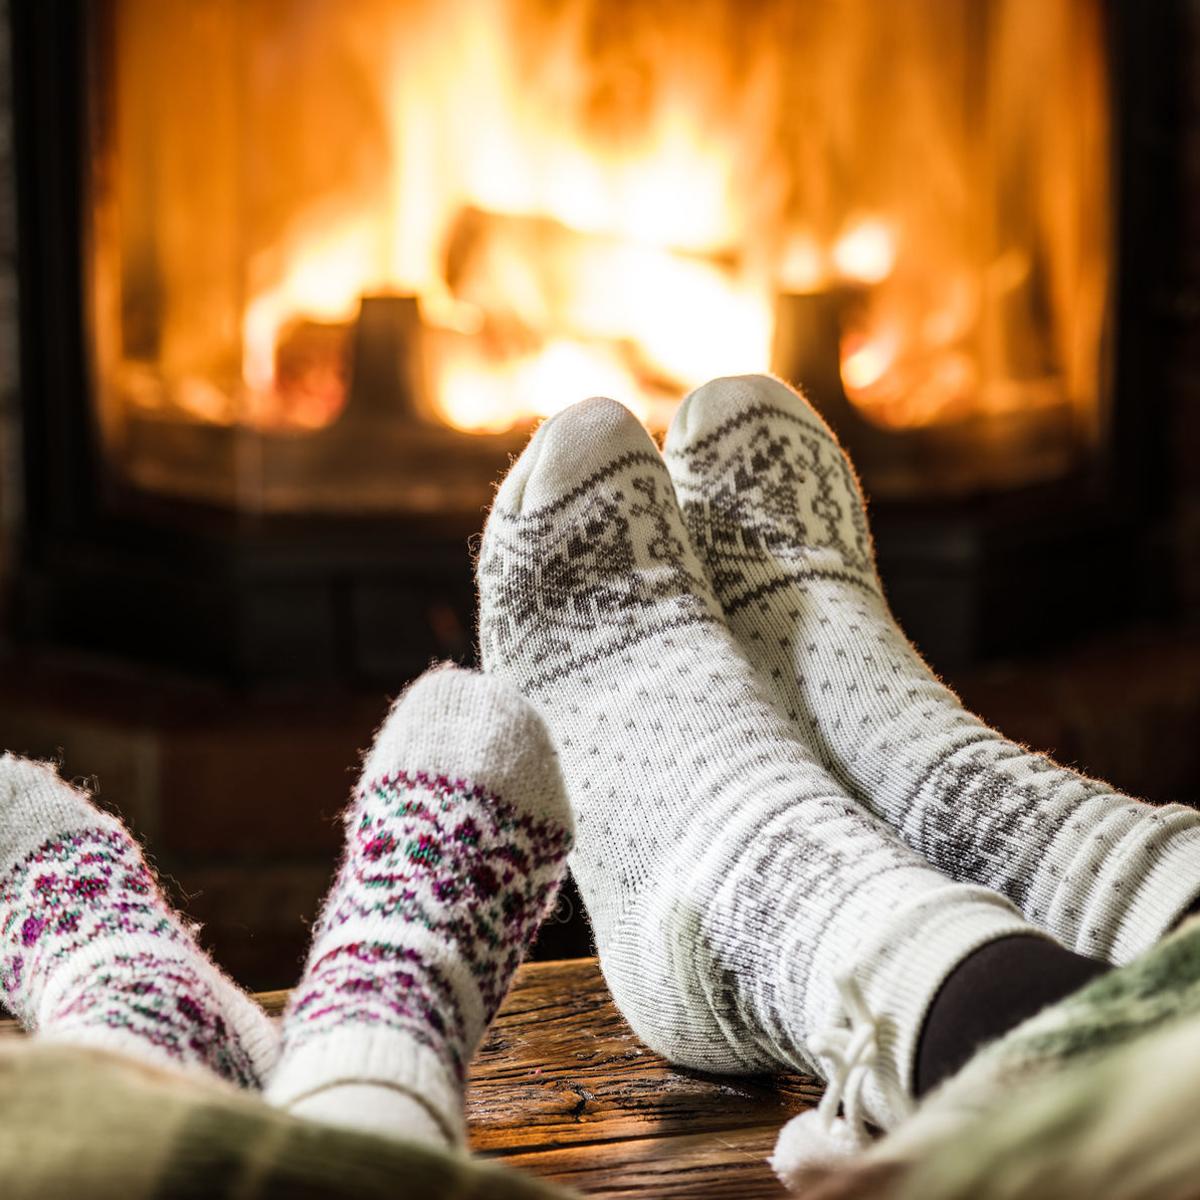 Fireplace thermostat Best Of Keep the Heat Simple Ways to Warm Your Home This Winter